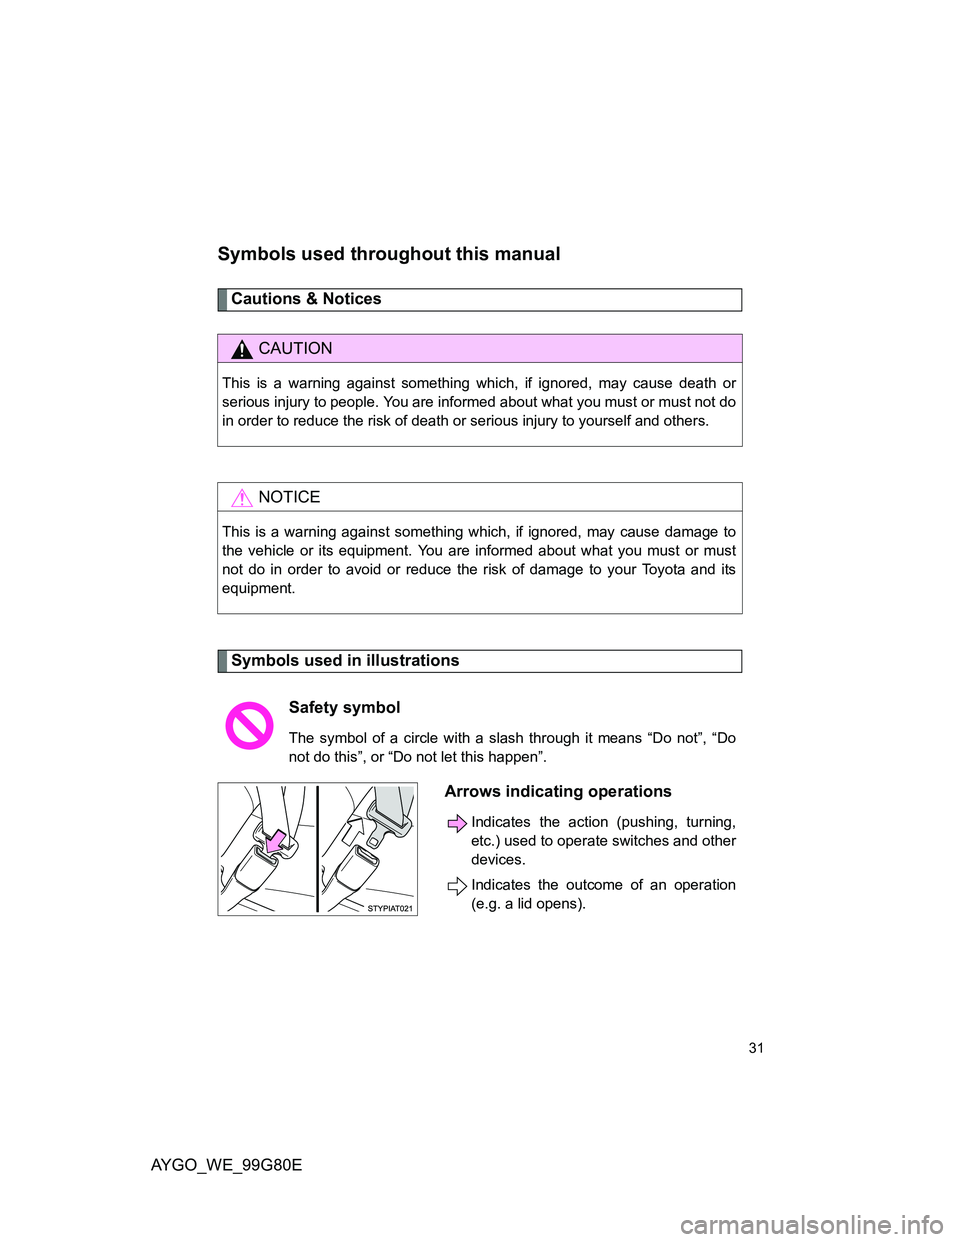 TOYOTA AYGO 2013  Owners Manual (in English) AYGO_WE_99G80E
31
Symbols used throughout this manual
Cautions & Notices 
Symbols used in illustrations
CAUTION
This is a warning against something which, if ignored, may cause death or
serious injury